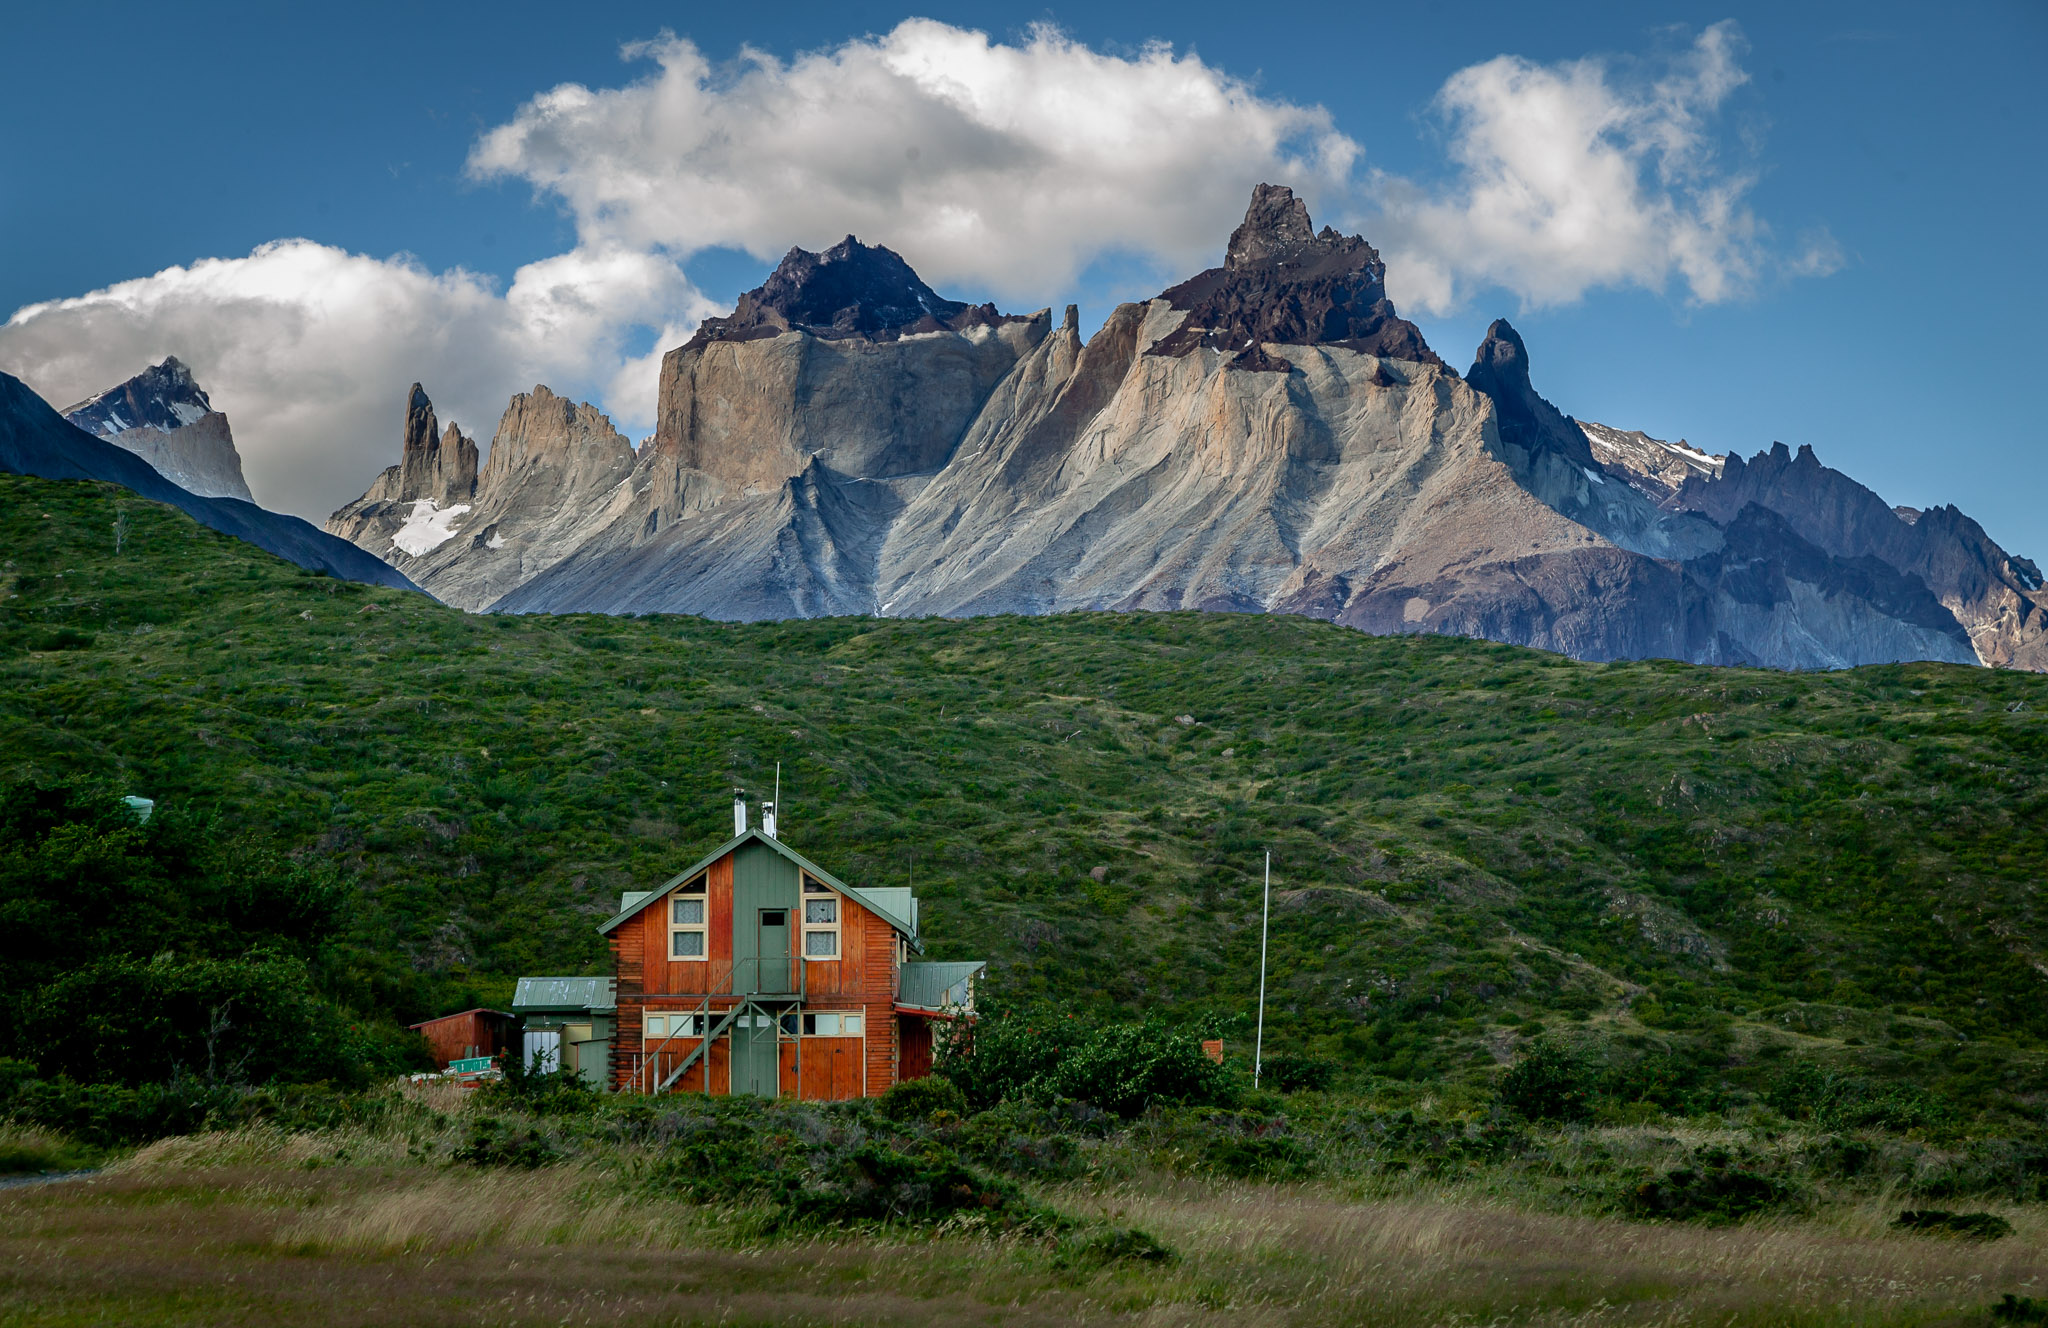 Los Cuernos towers over old Refugio, now ranger station